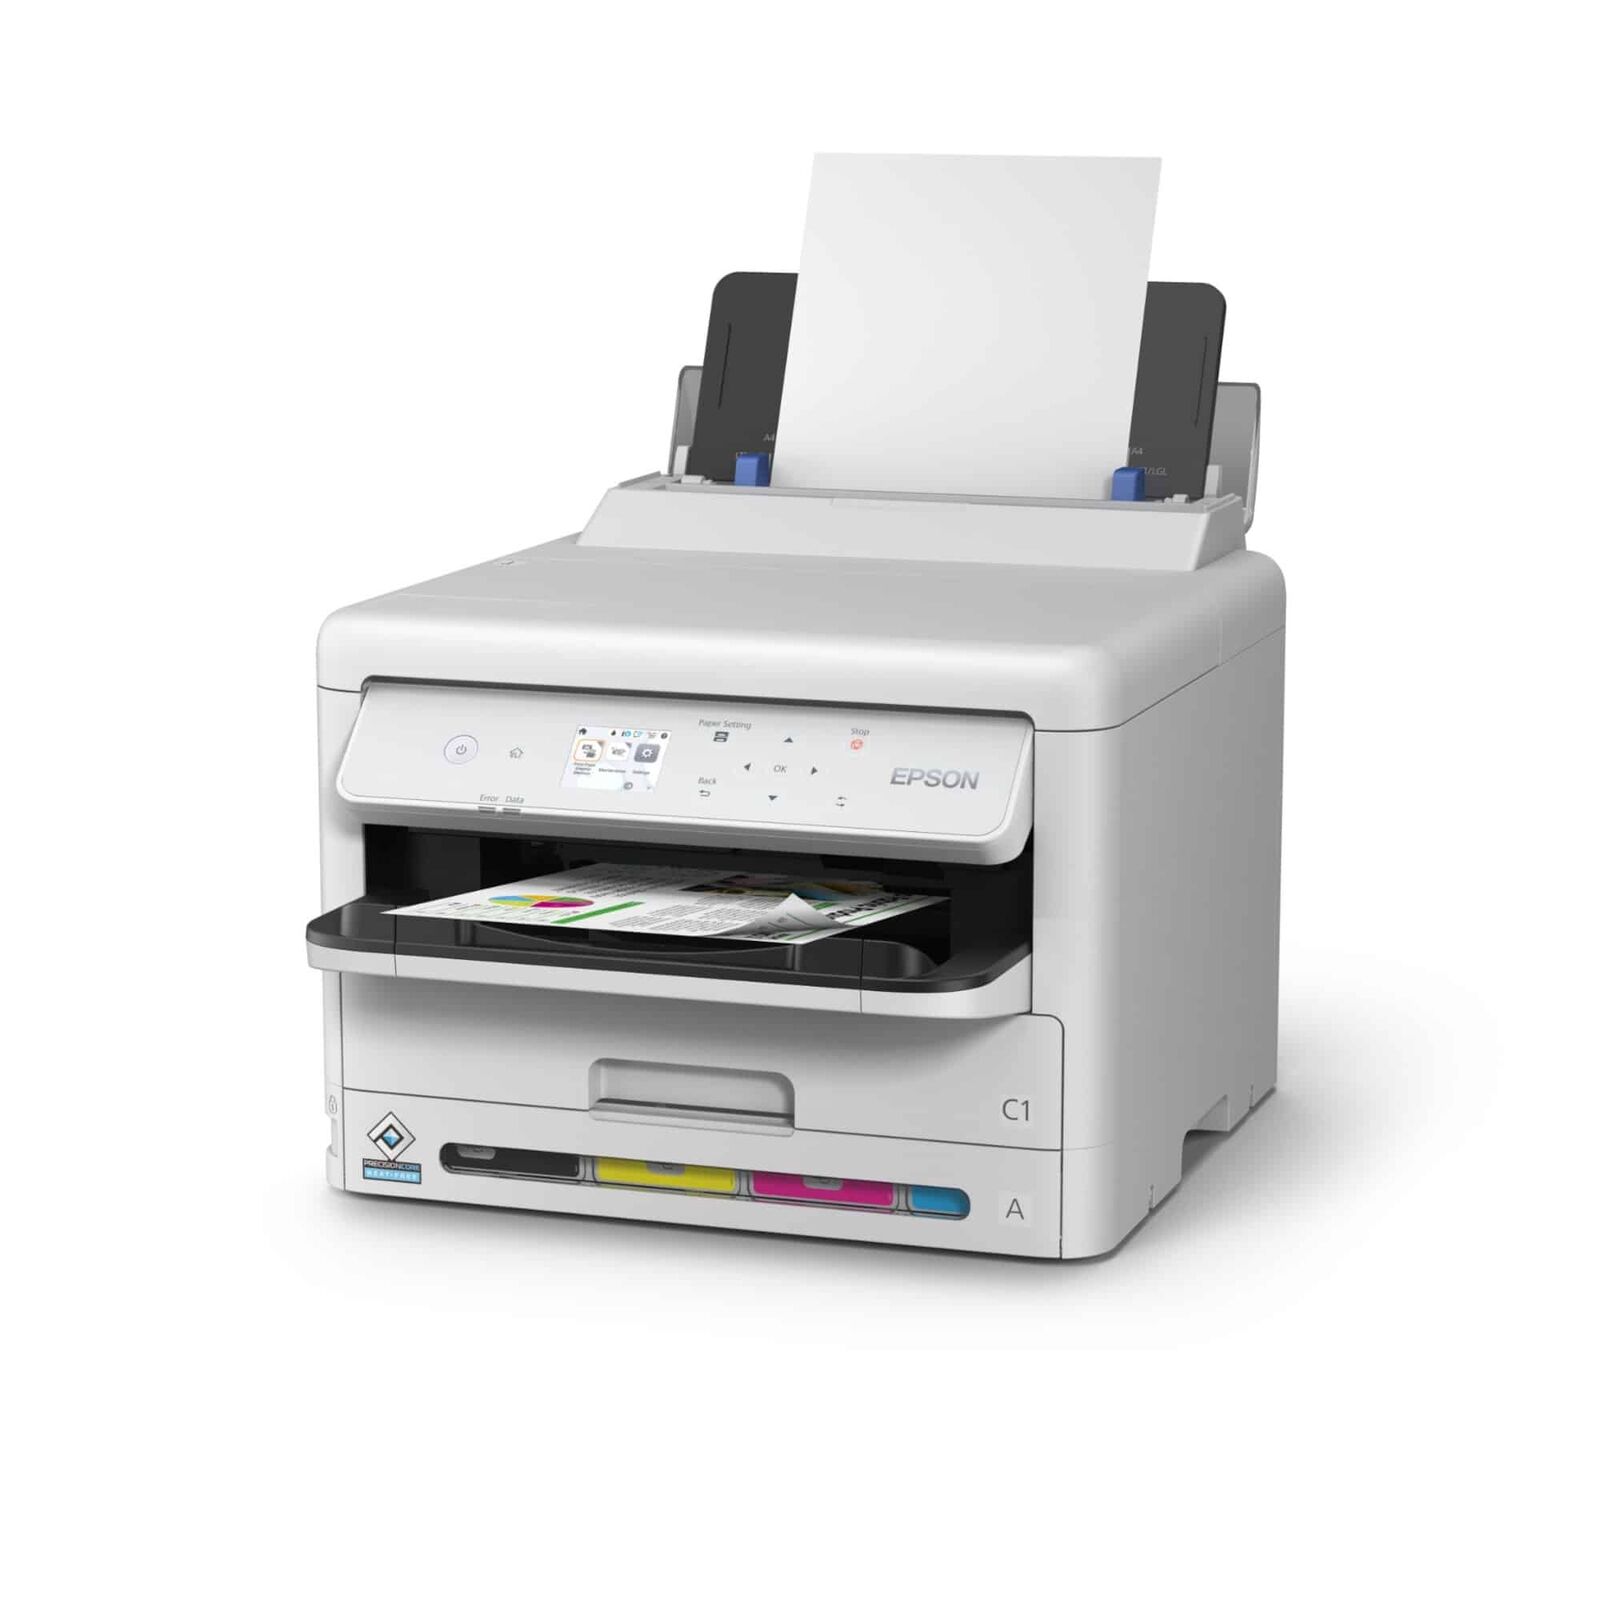 Epson - WFC5390 - High Efficiency Wireless Printer - Shipping is Always Free